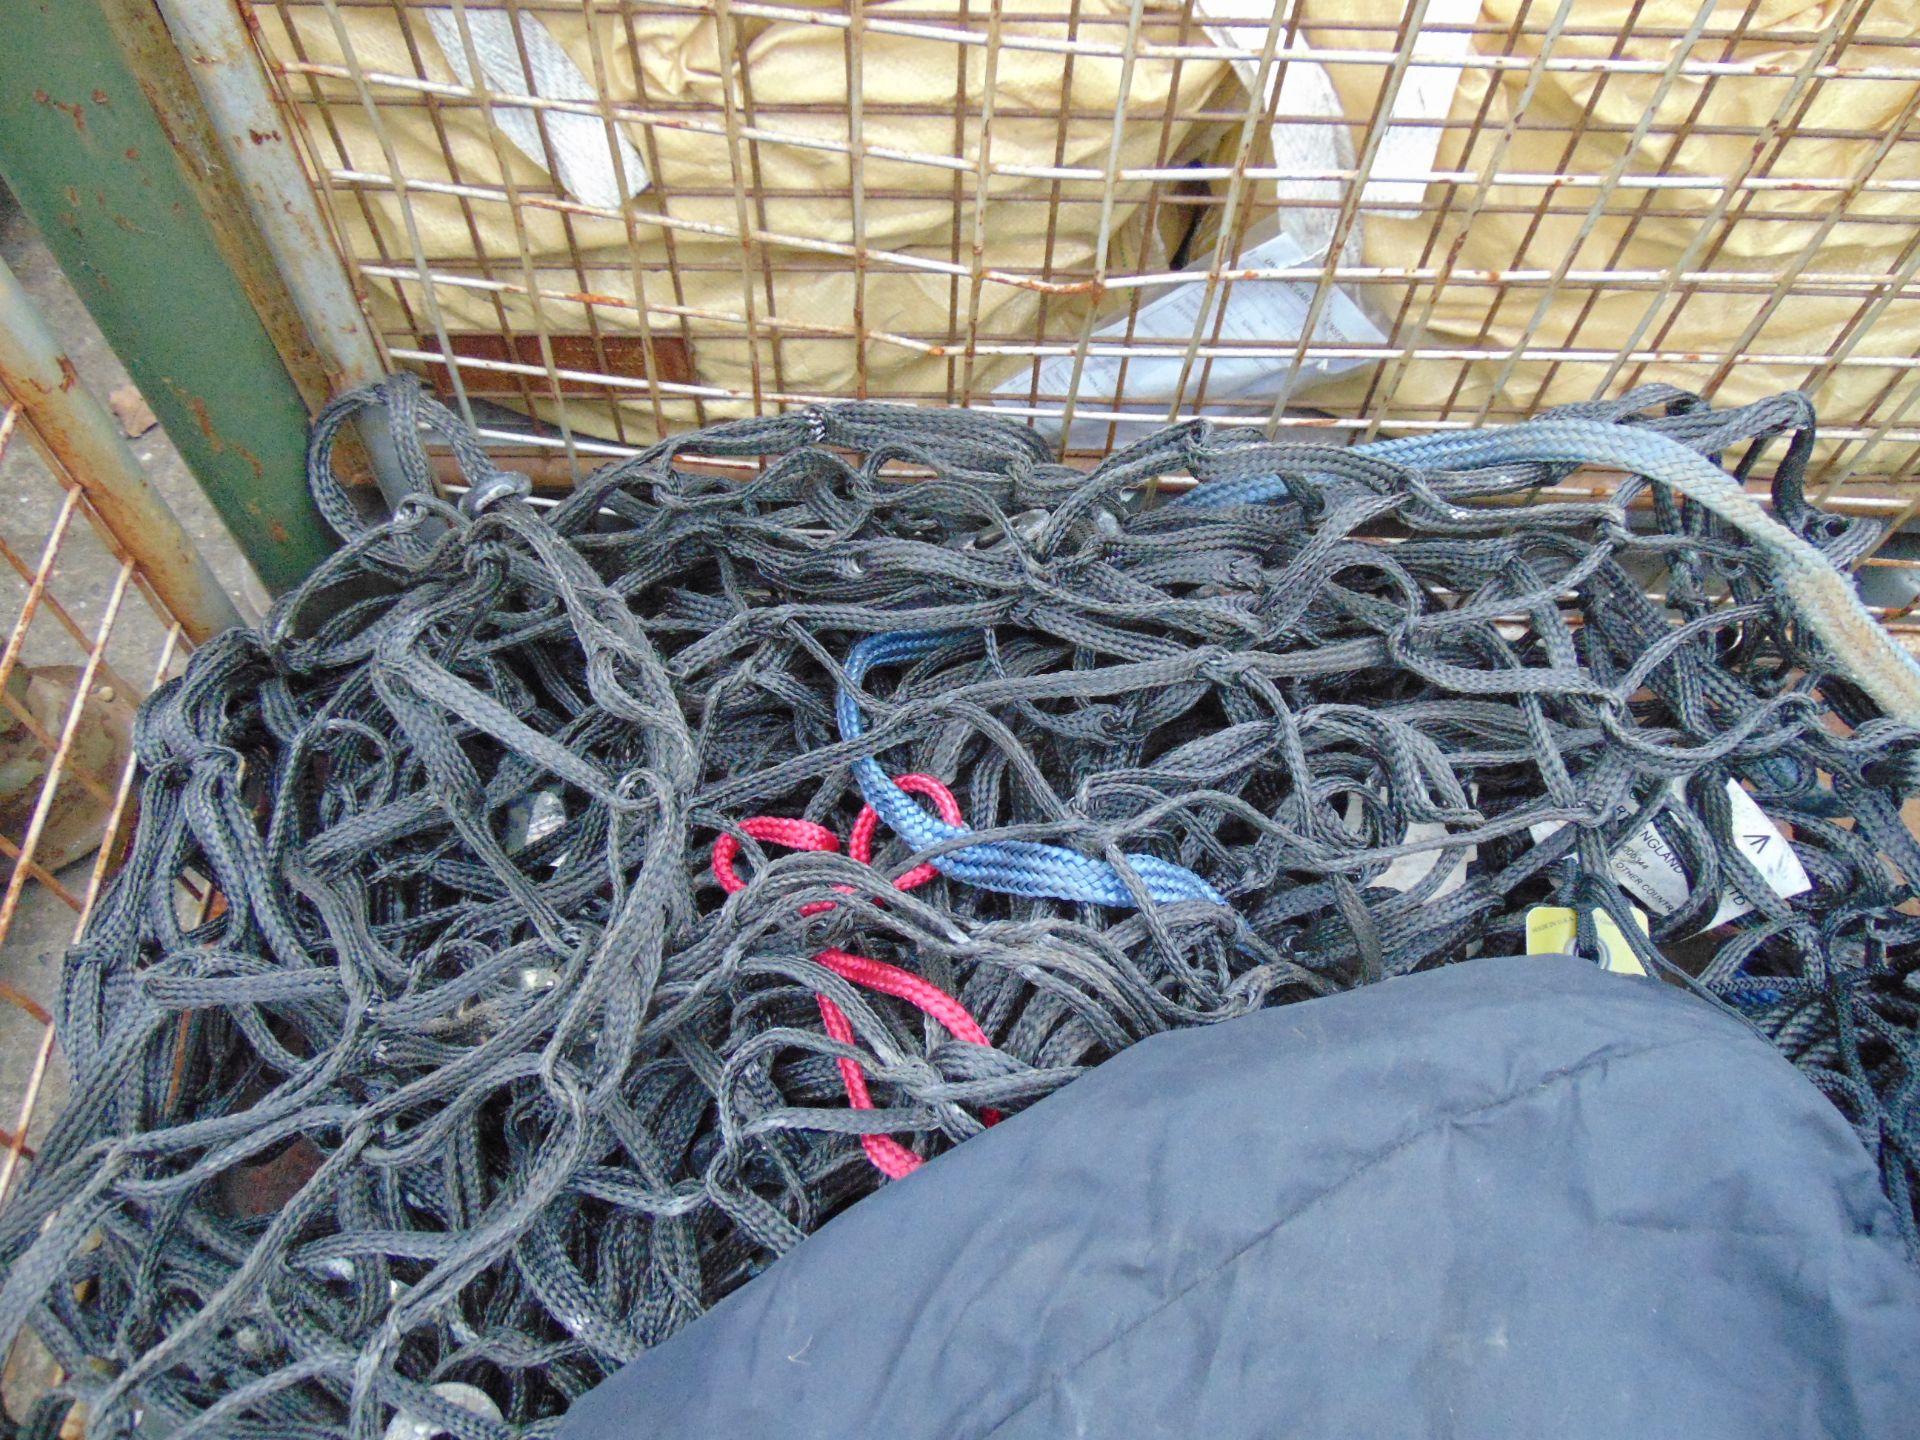 5 x Vehicle Cargo Nets in bags as shown - Image 2 of 3